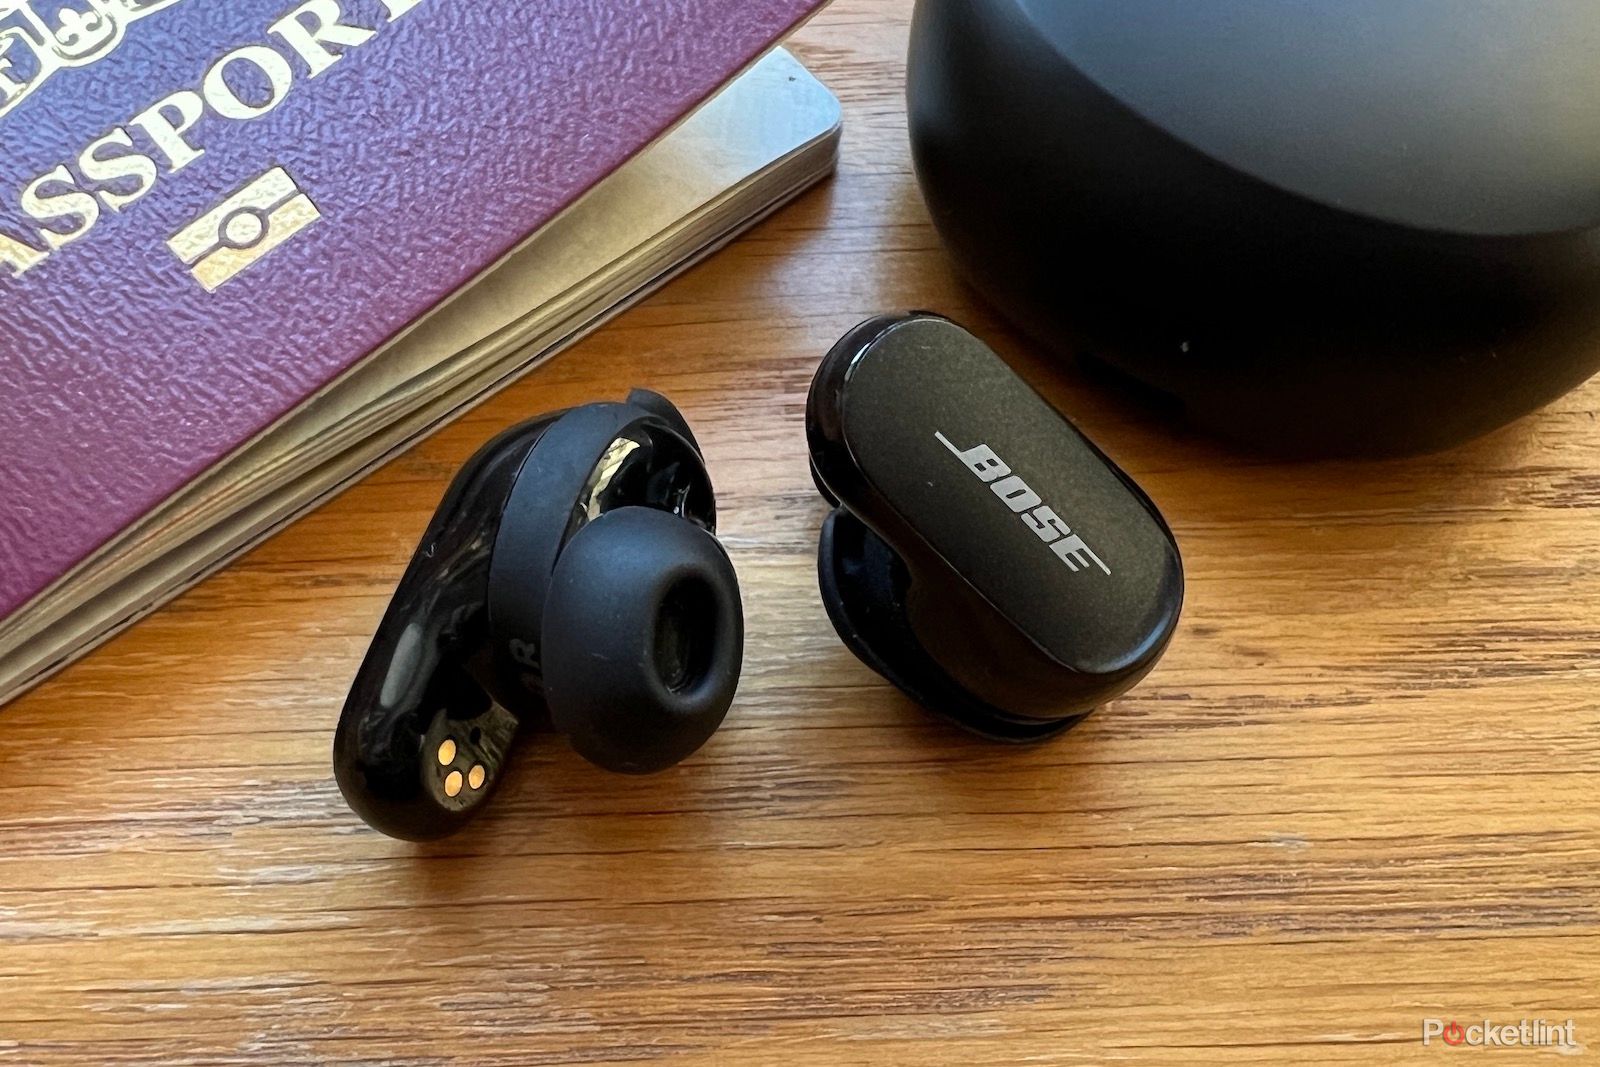 Bose headphones are discounted by $50 with these Back to School sales